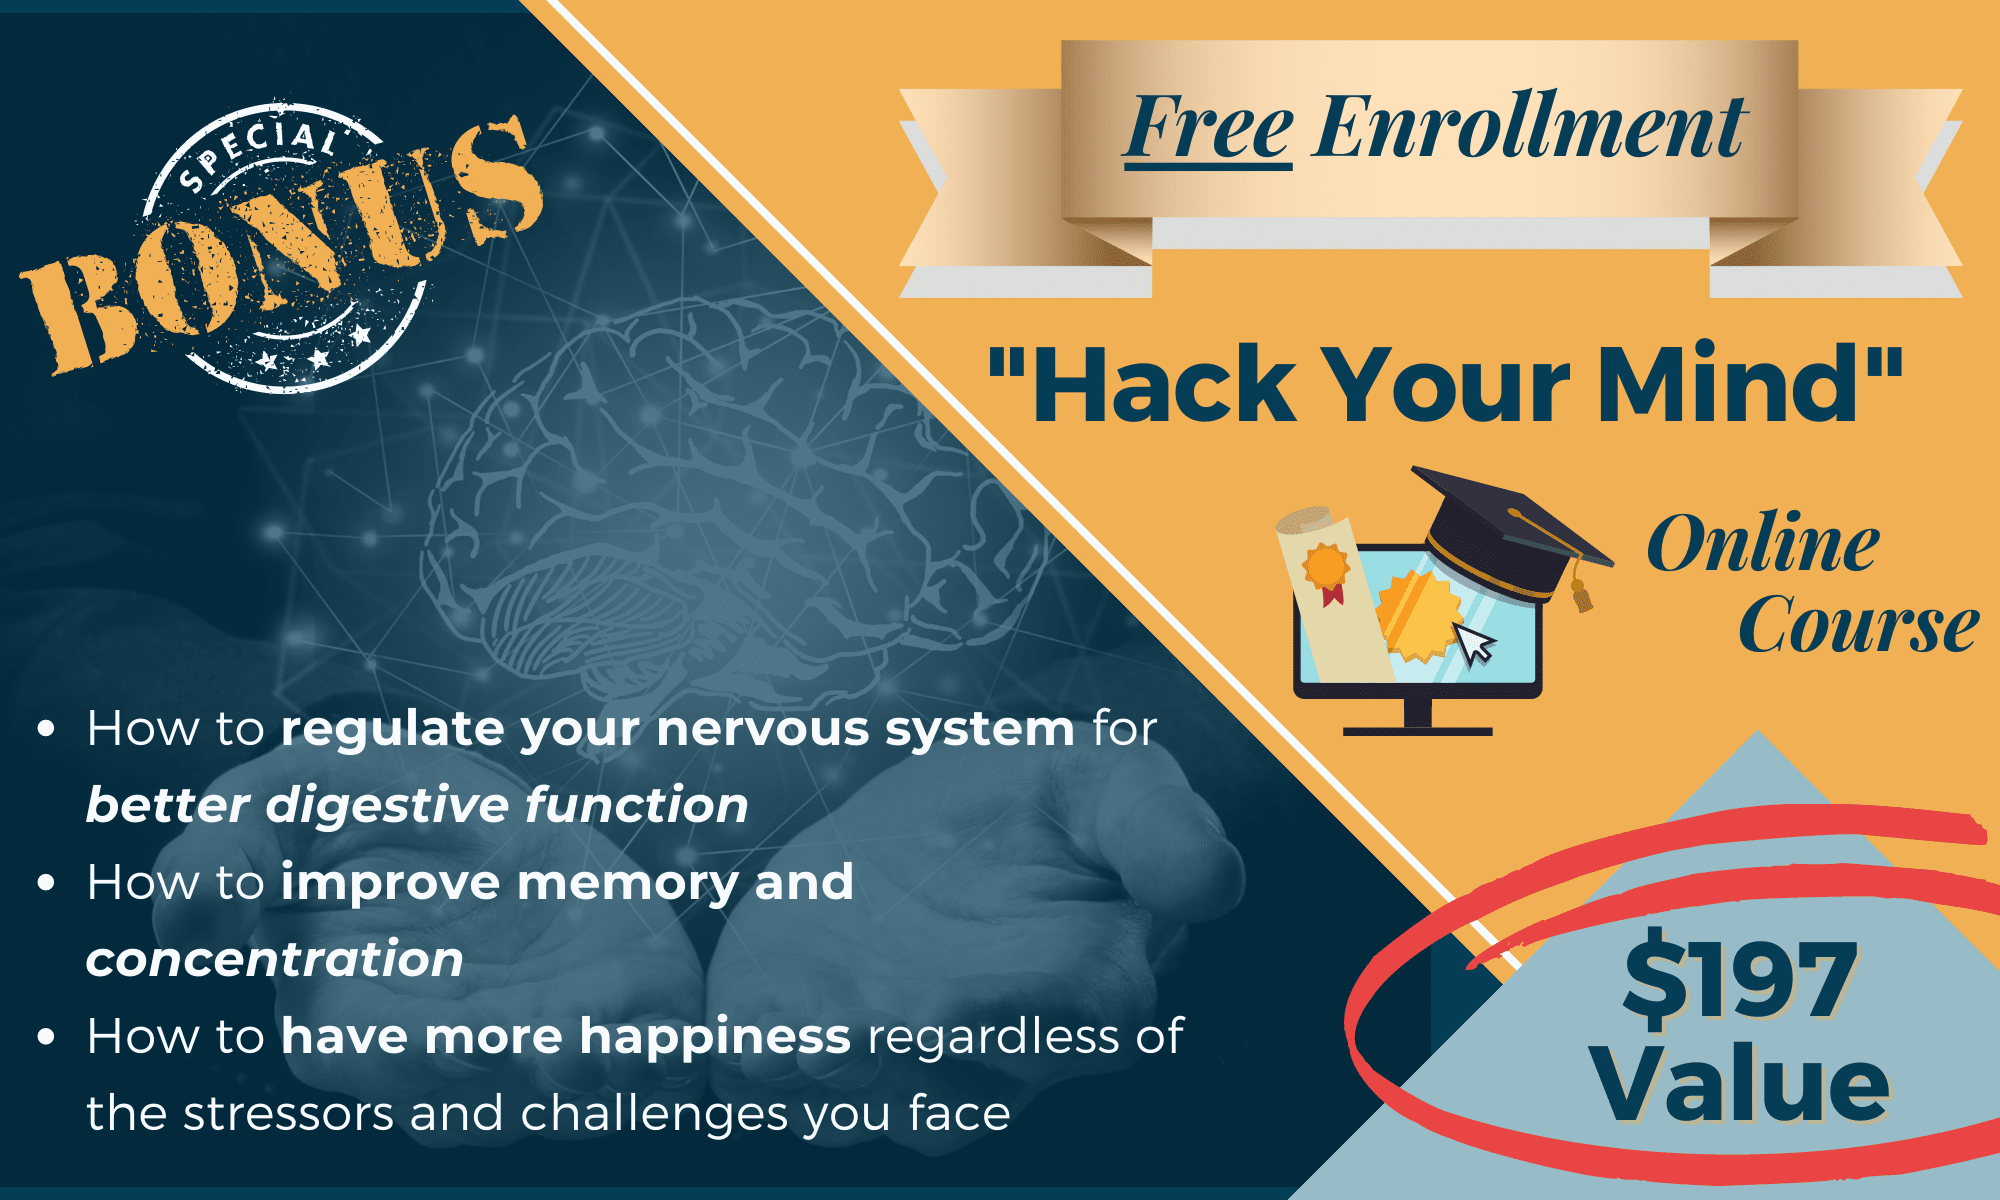 Free Enrollment into our Hack your Mind Course $197 Value (1)